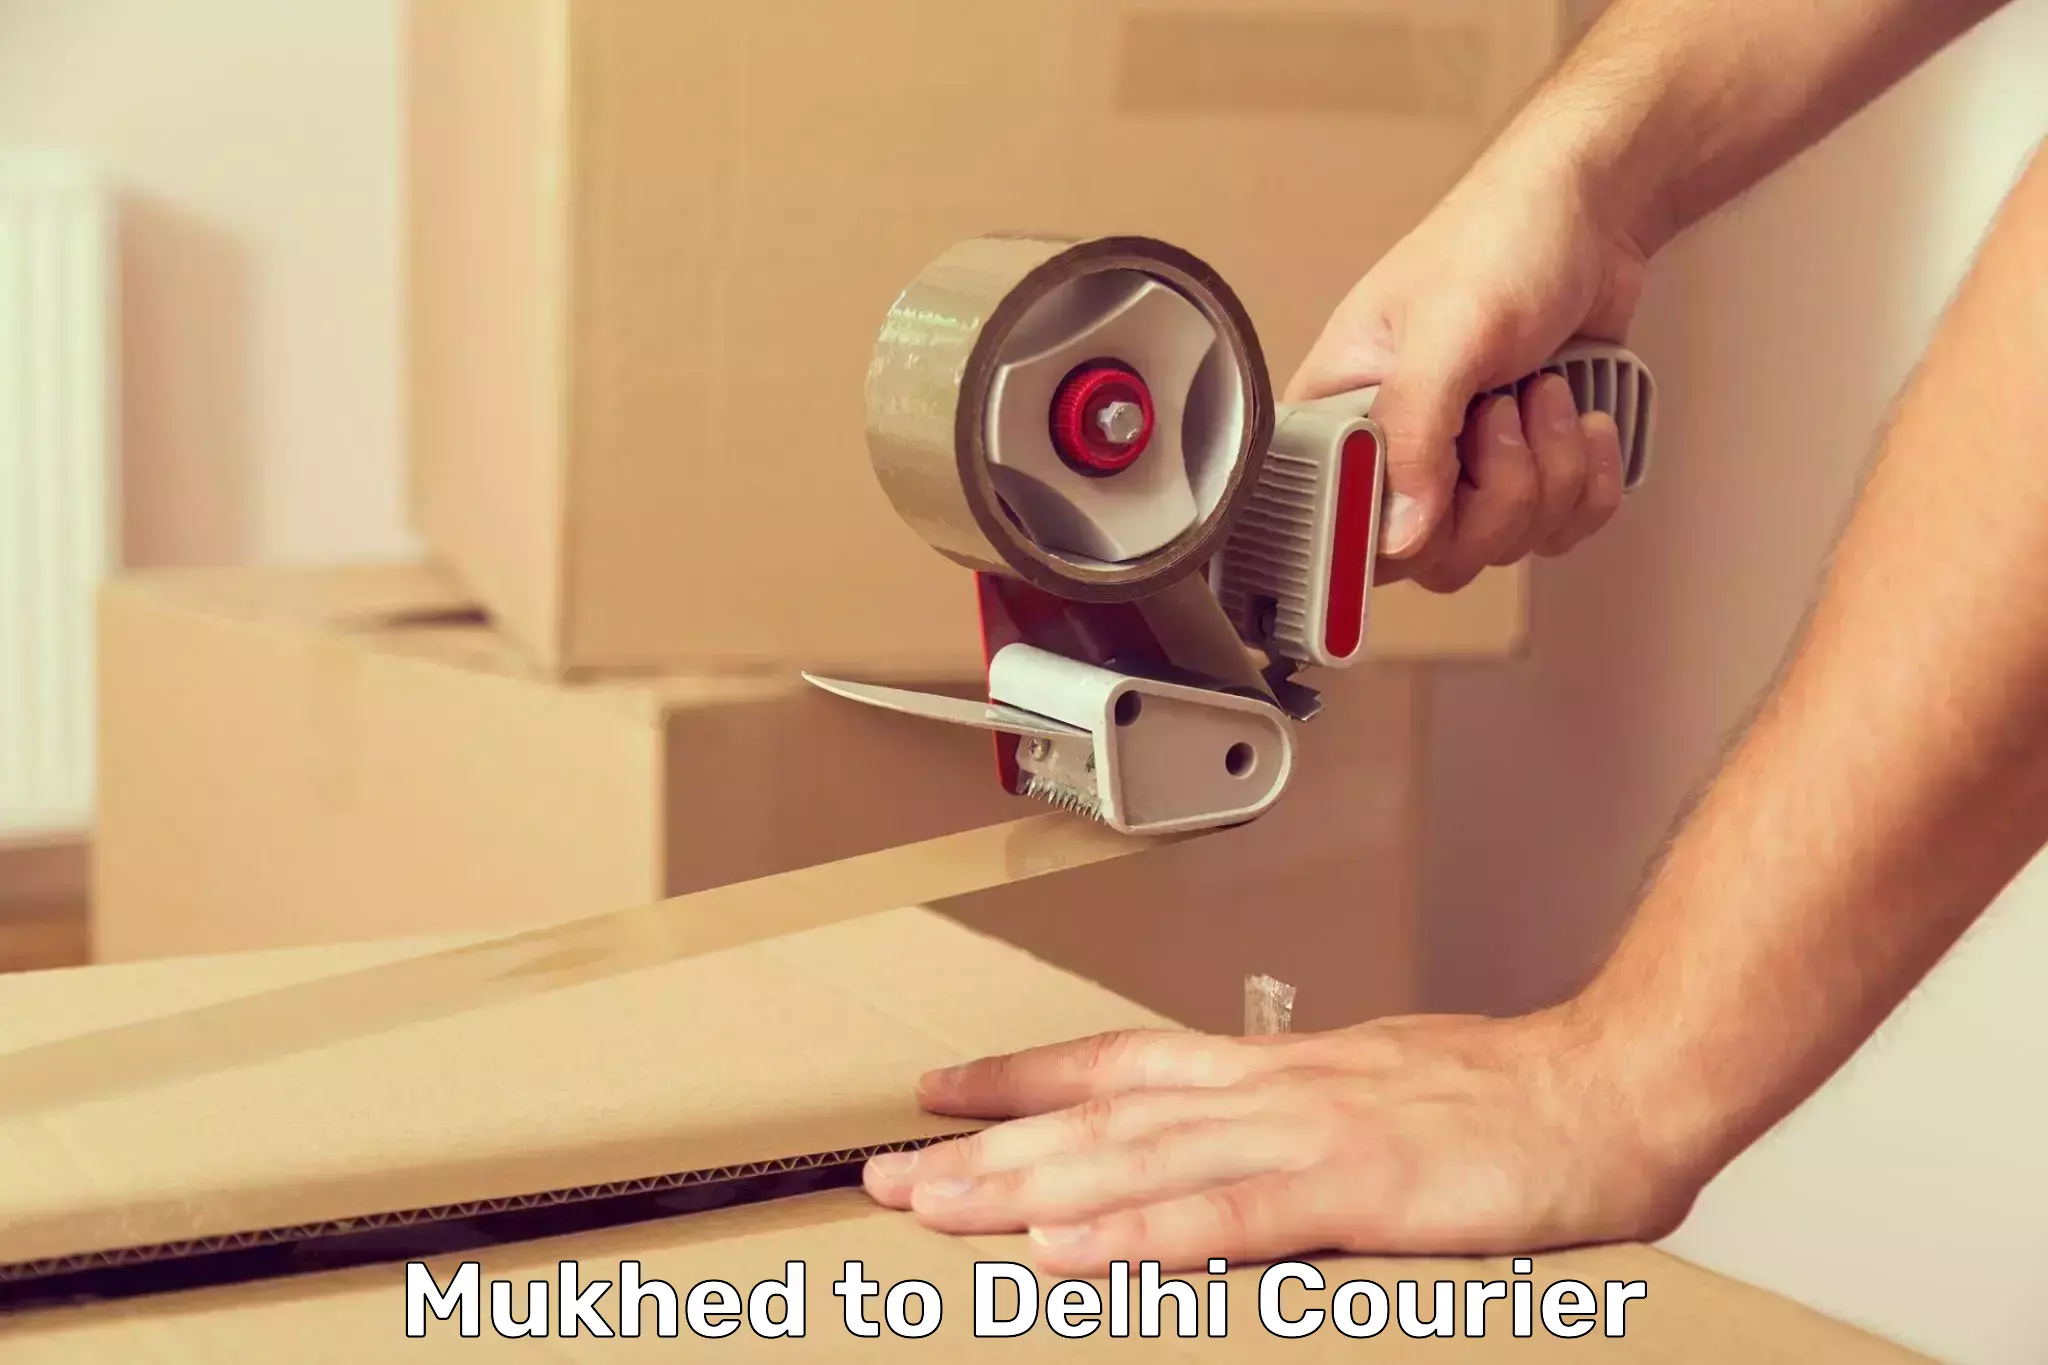 Express delivery network Mukhed to East Delhi